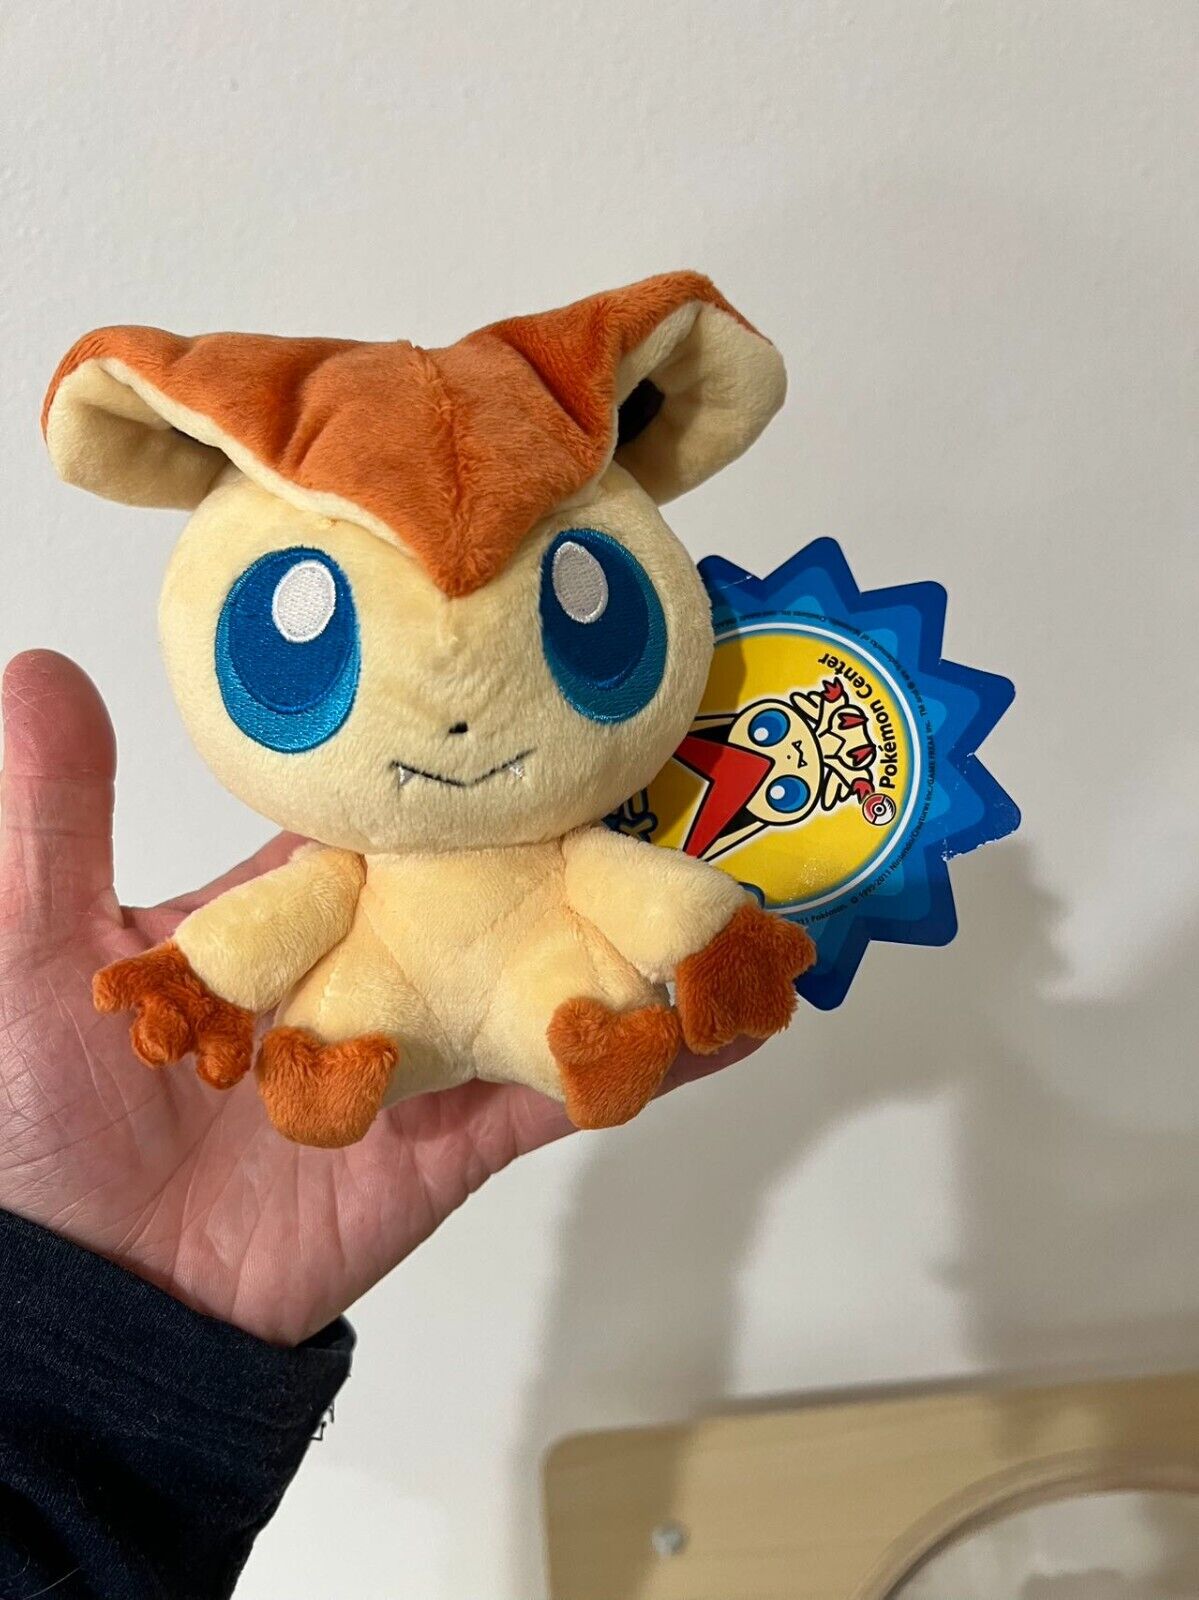 victini pokedoll Rare 2011 edition with blue star tag included for sale